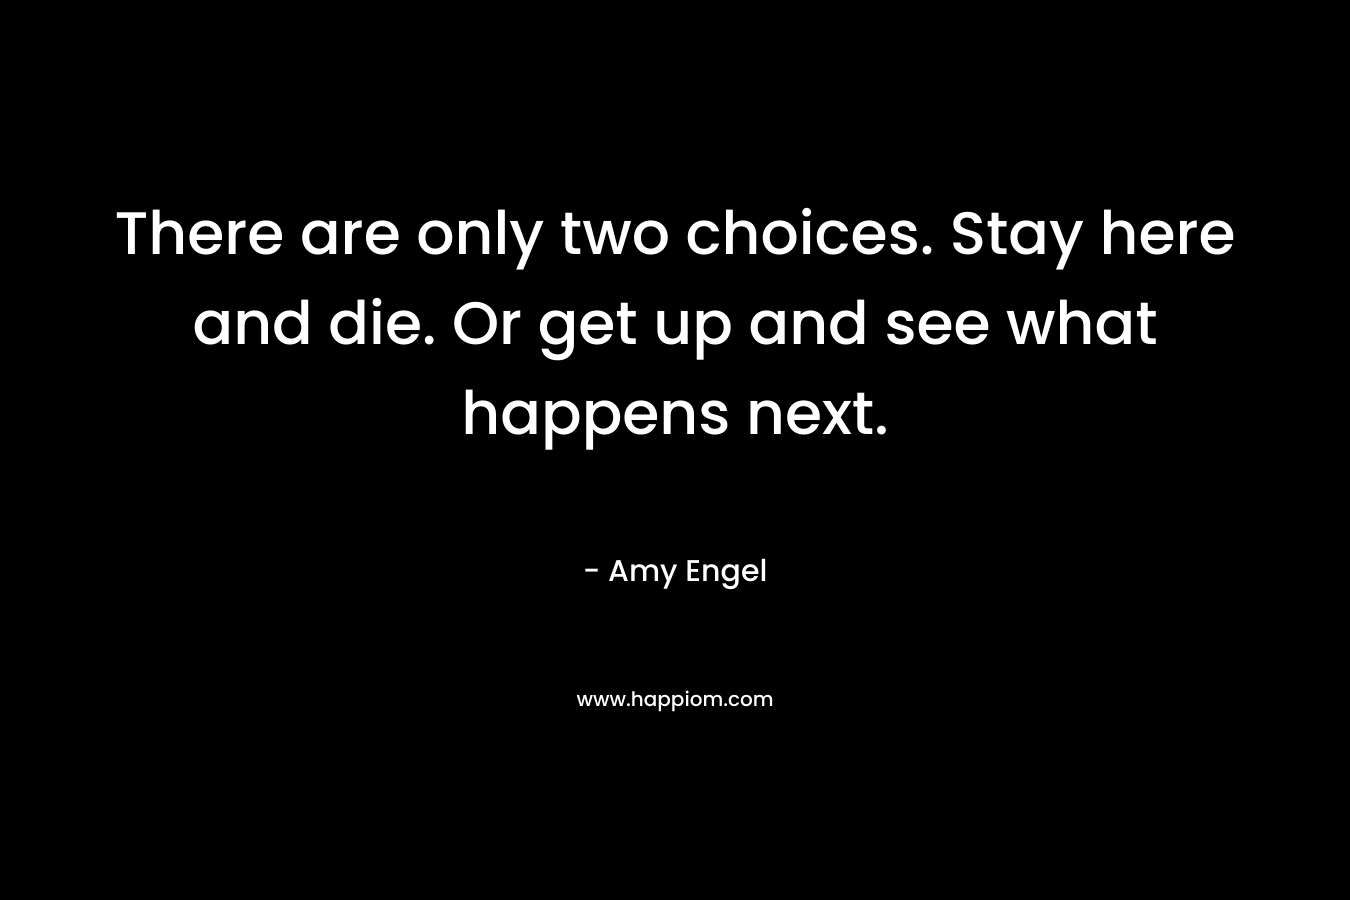 There are only two choices. Stay here and die. Or get up and see what happens next. – Amy Engel